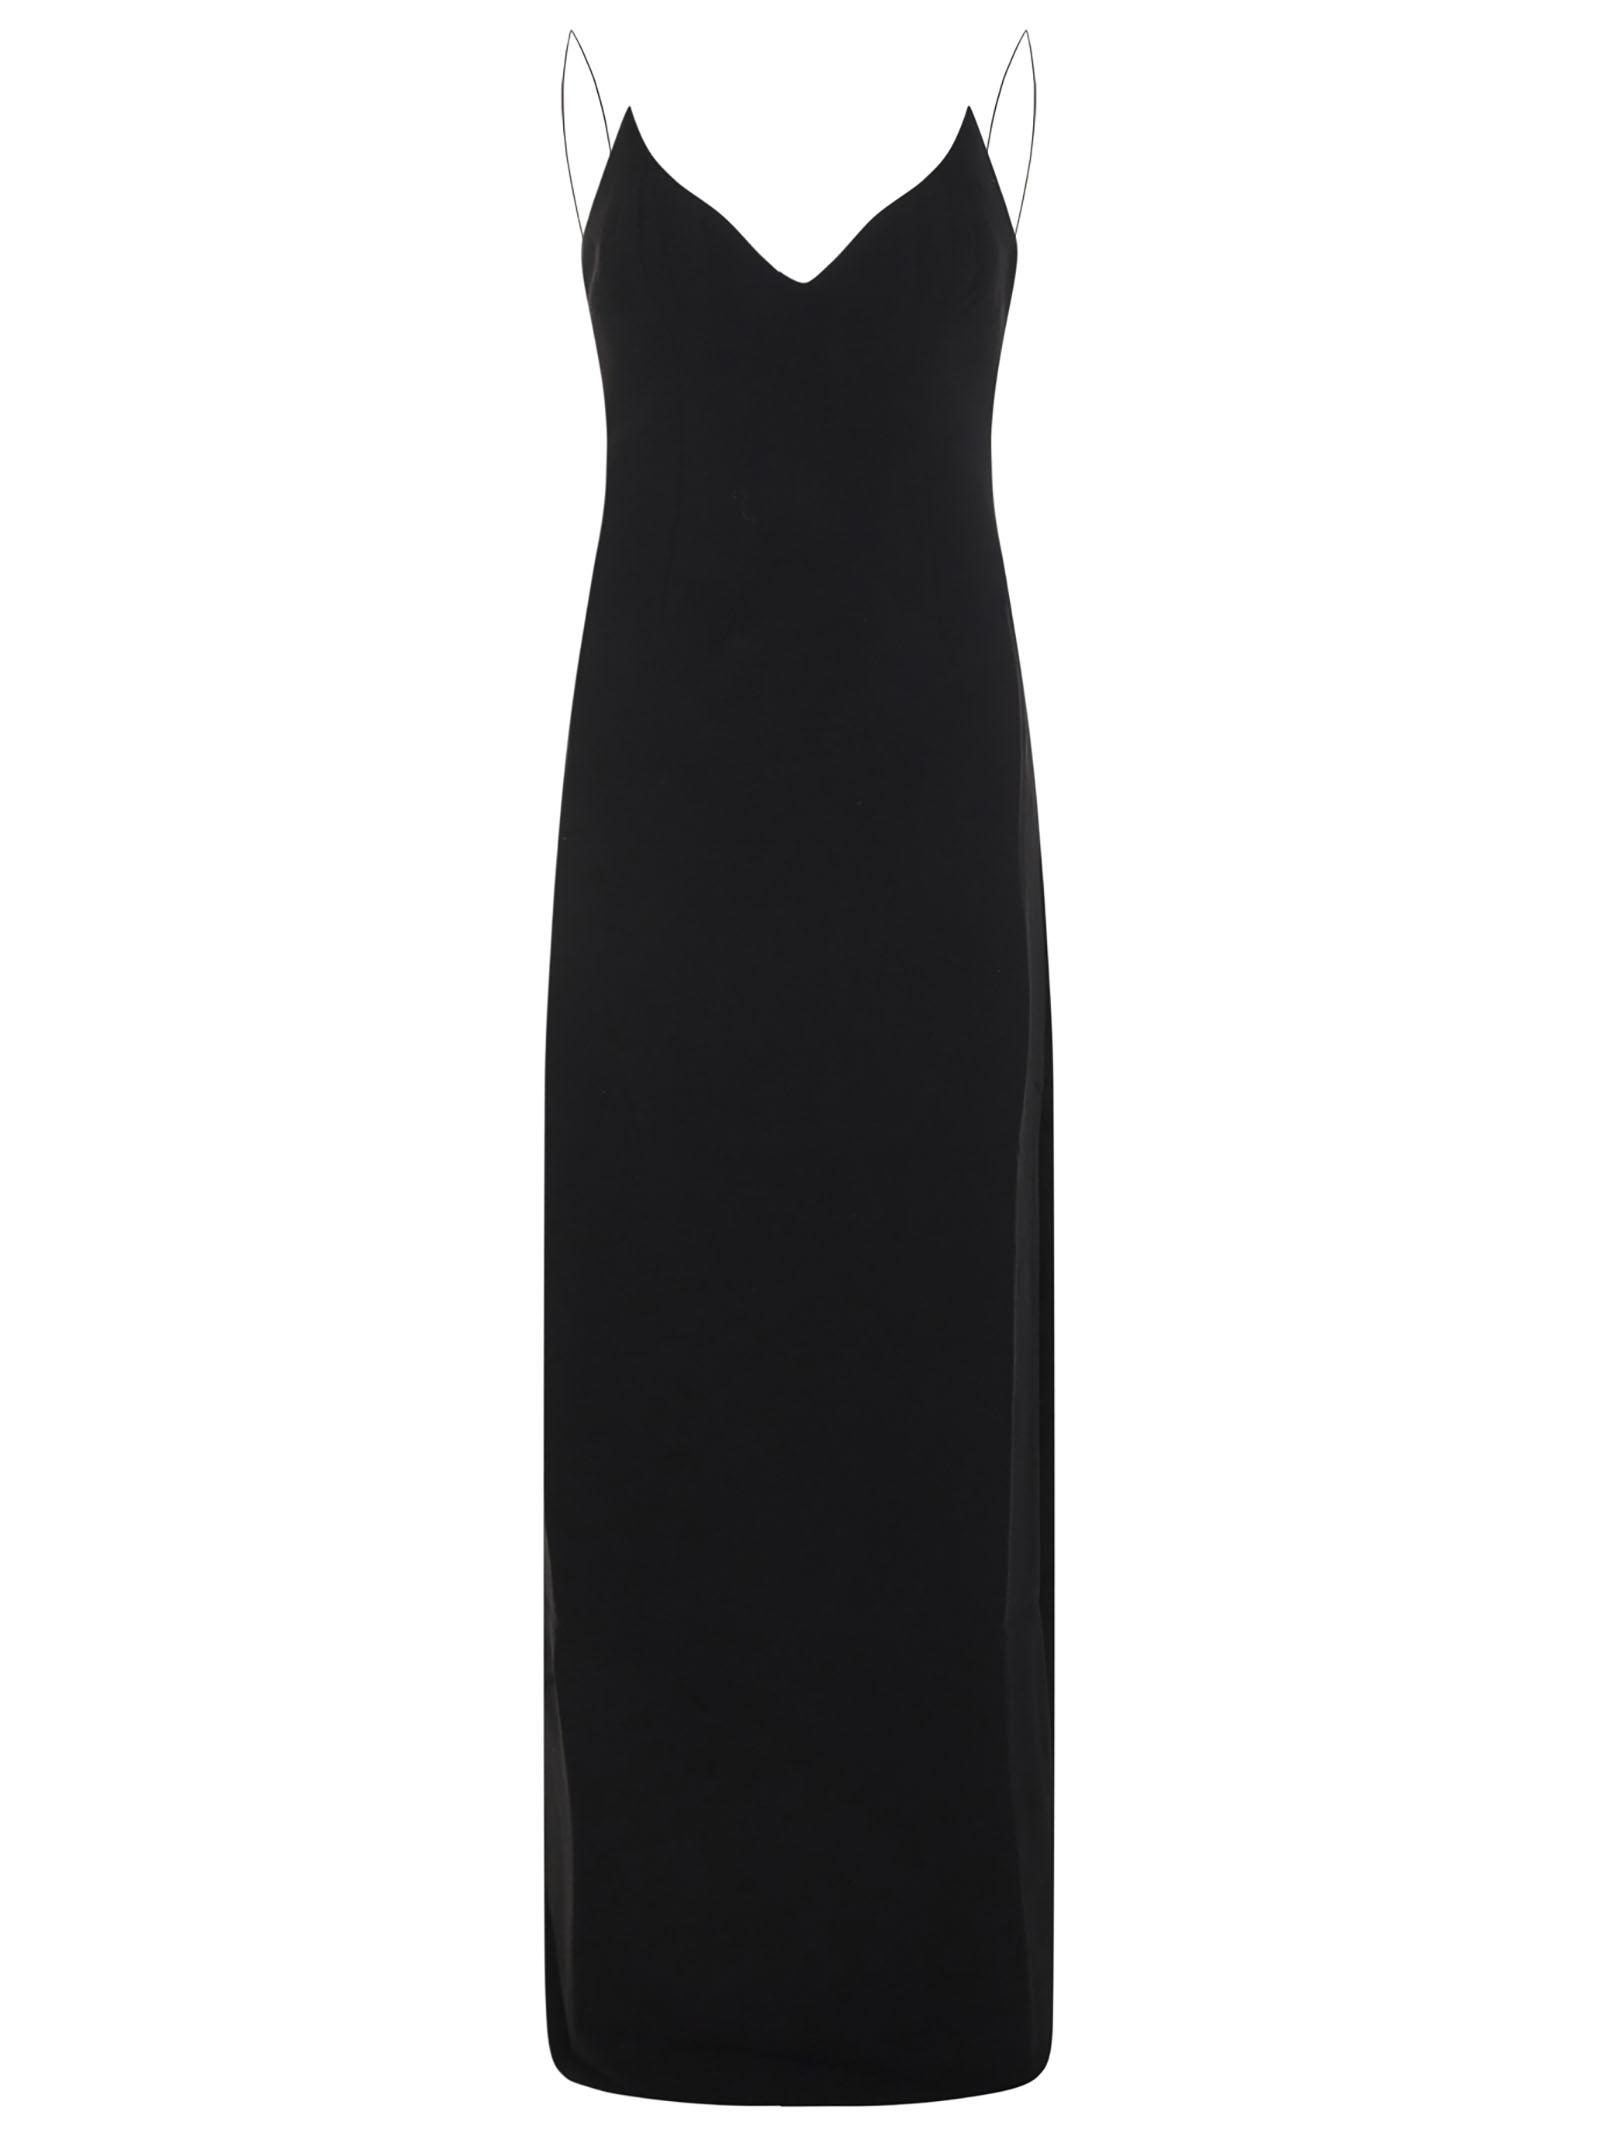 Monot Synthetic Dress in Black | Lyst